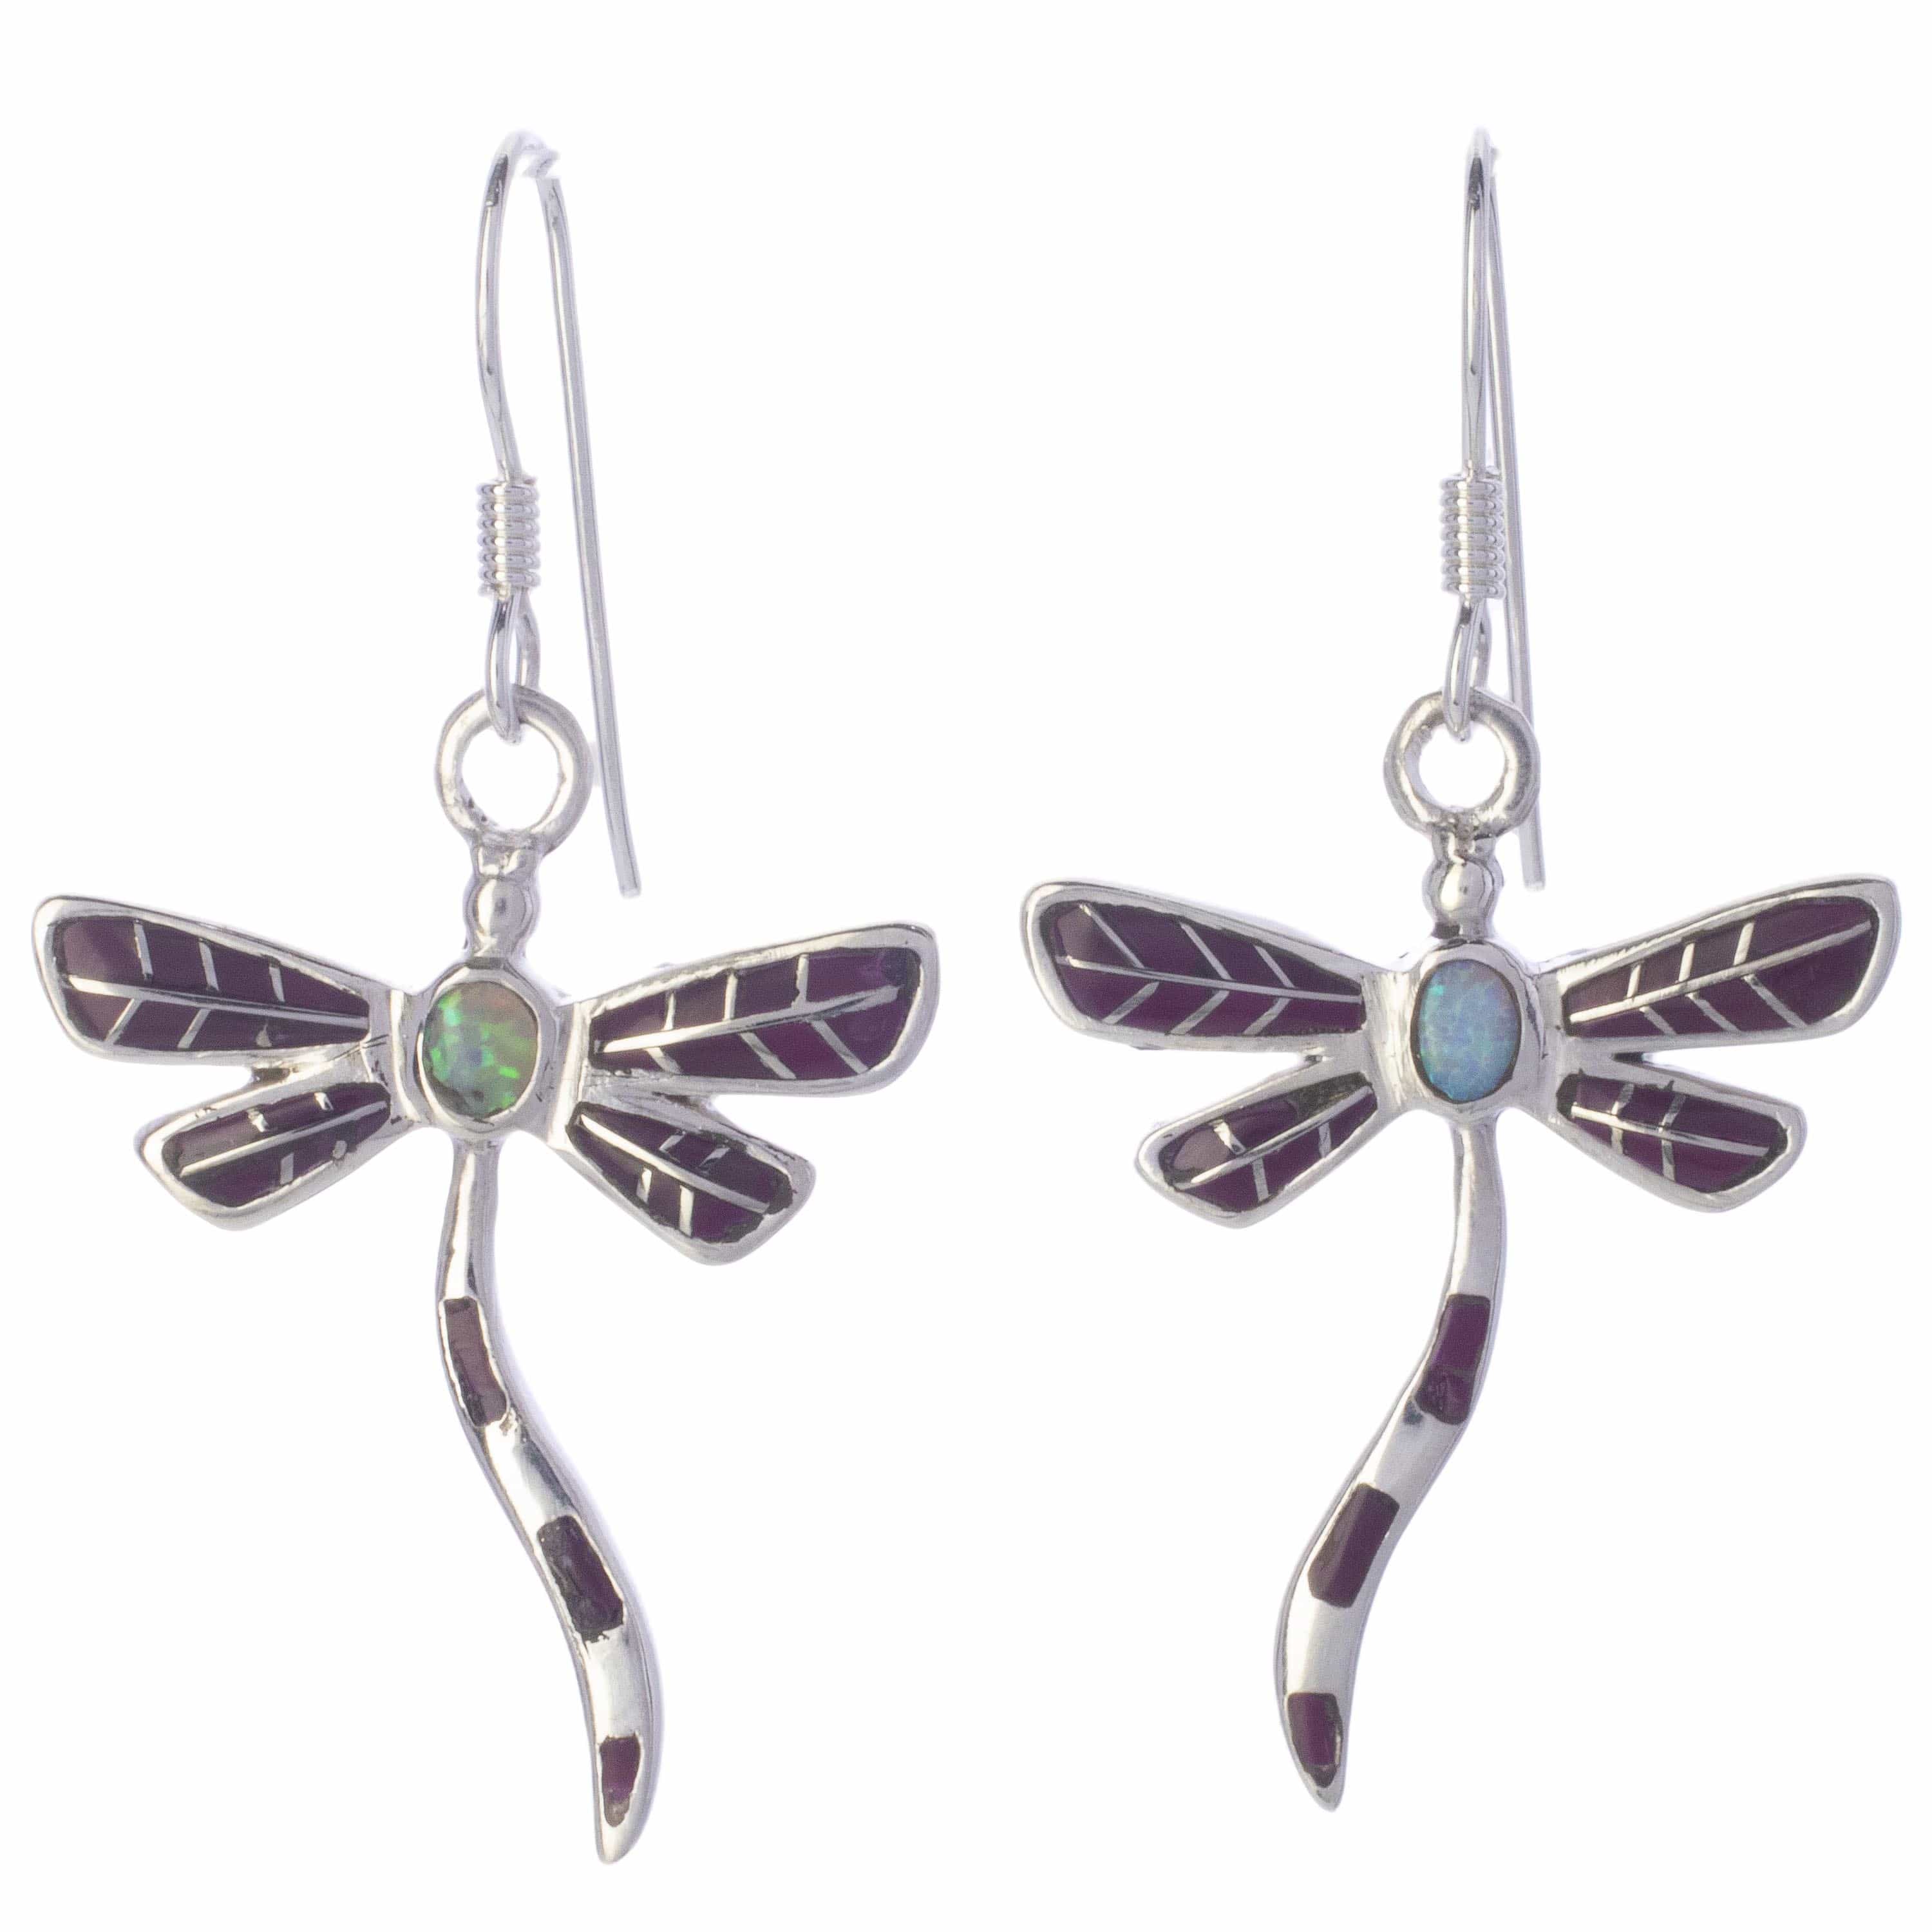 KALIFANO Southwest Silver Jewelry Sugilite Dragonfly Sterling Silver Earrings with French Hook USA Handmade with Opal Accent NME.0893.SG